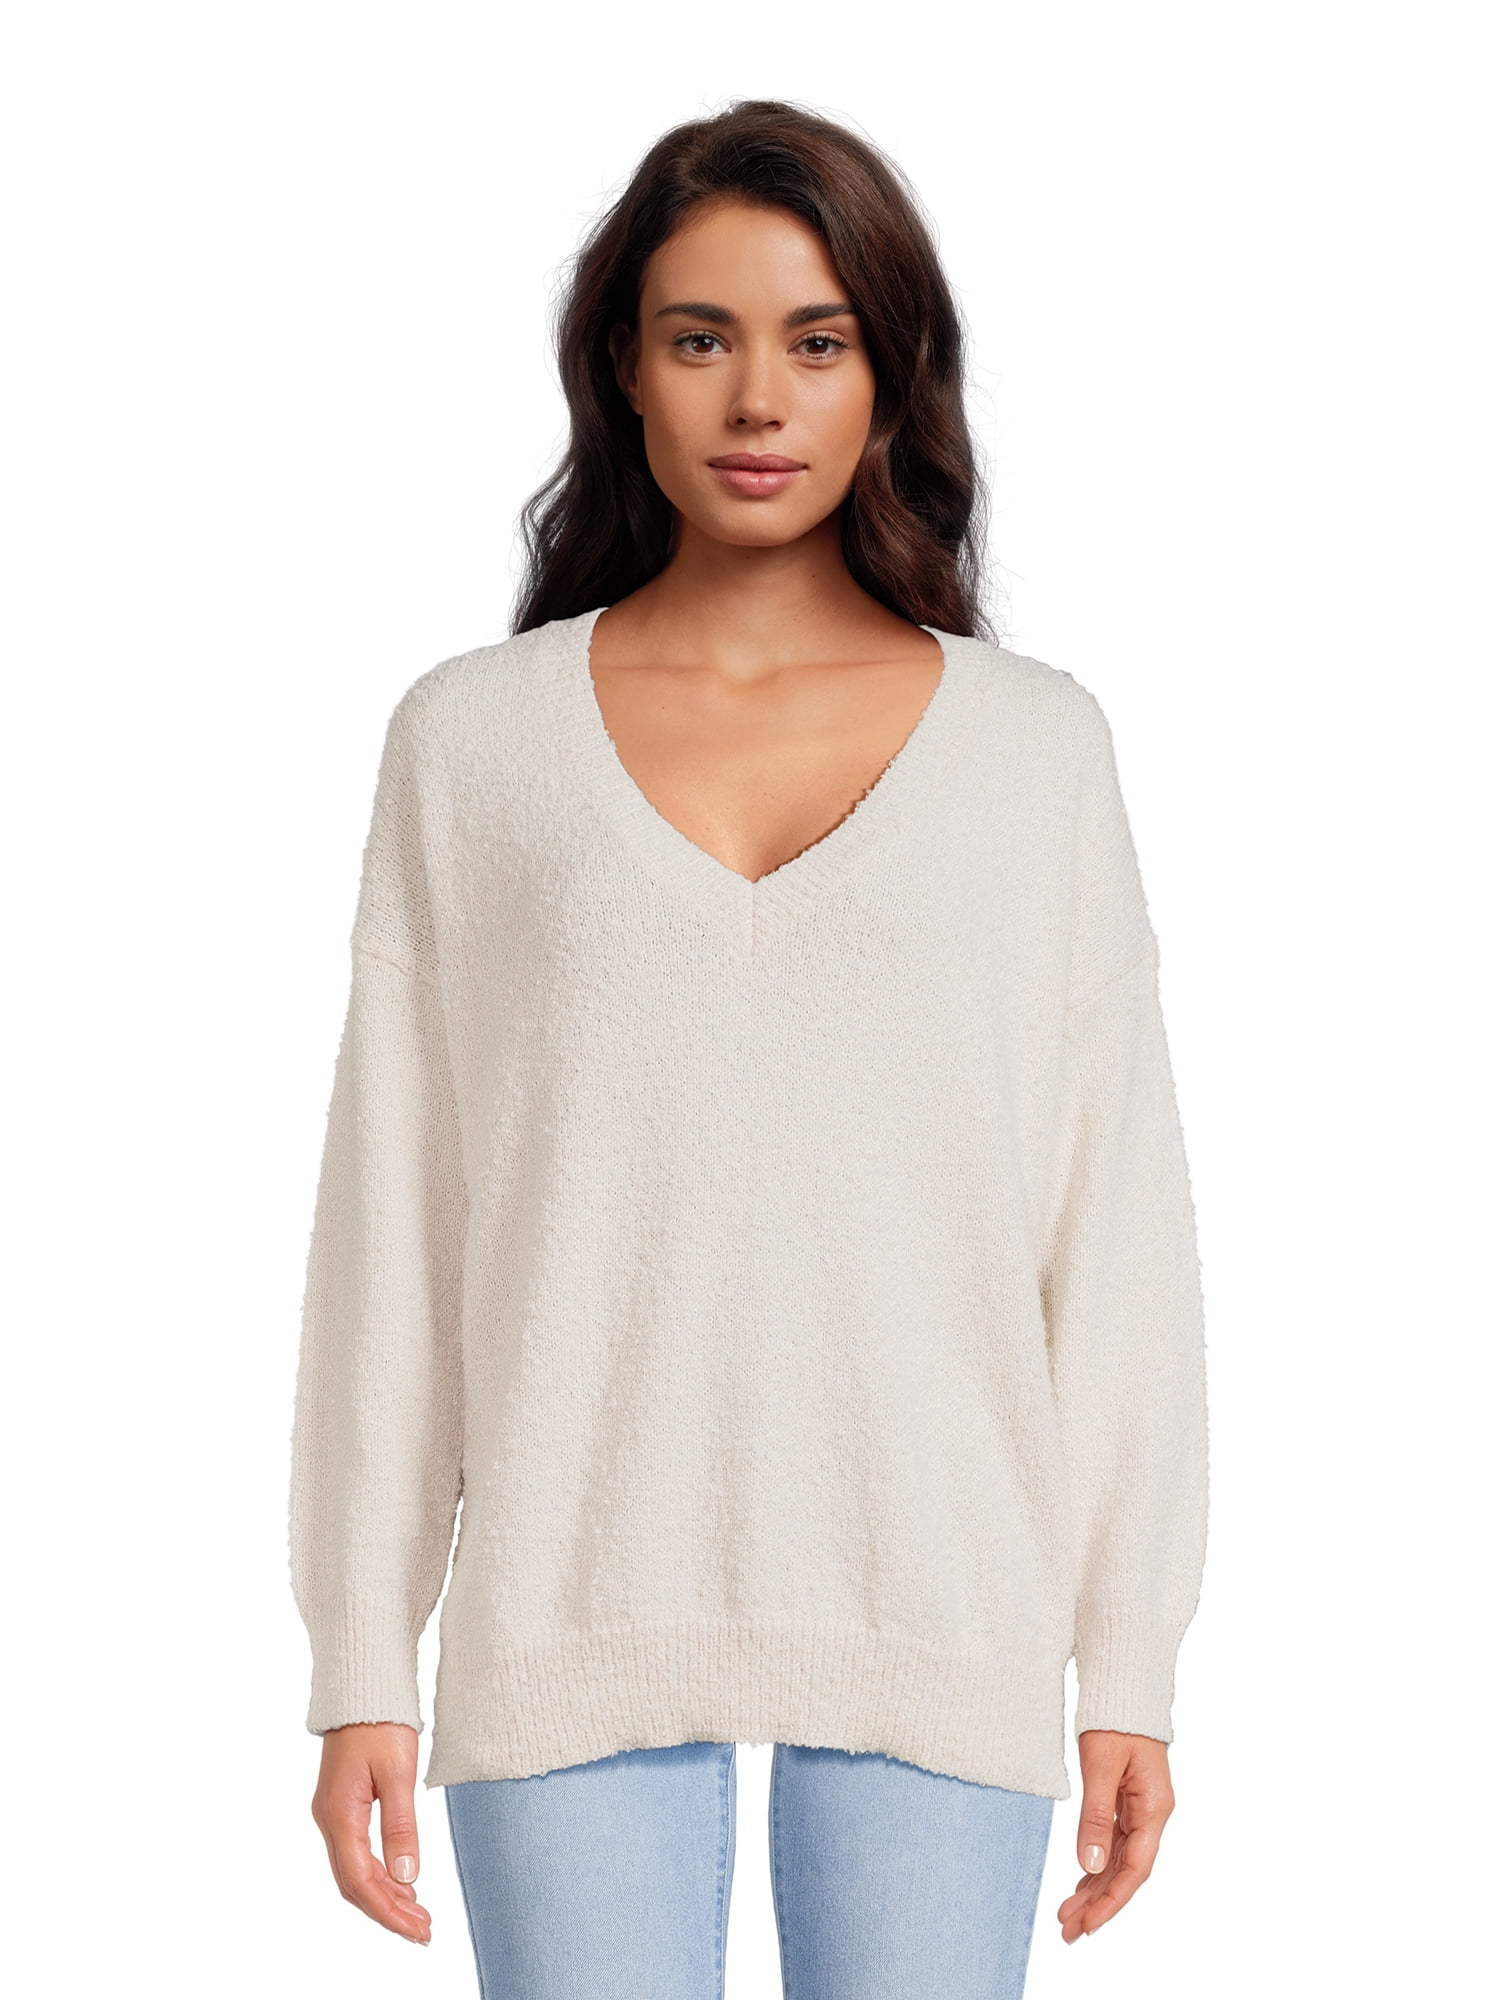 Dreamers By Debut Women's Oversized Tunic V Neck Sweater, Midweight ...